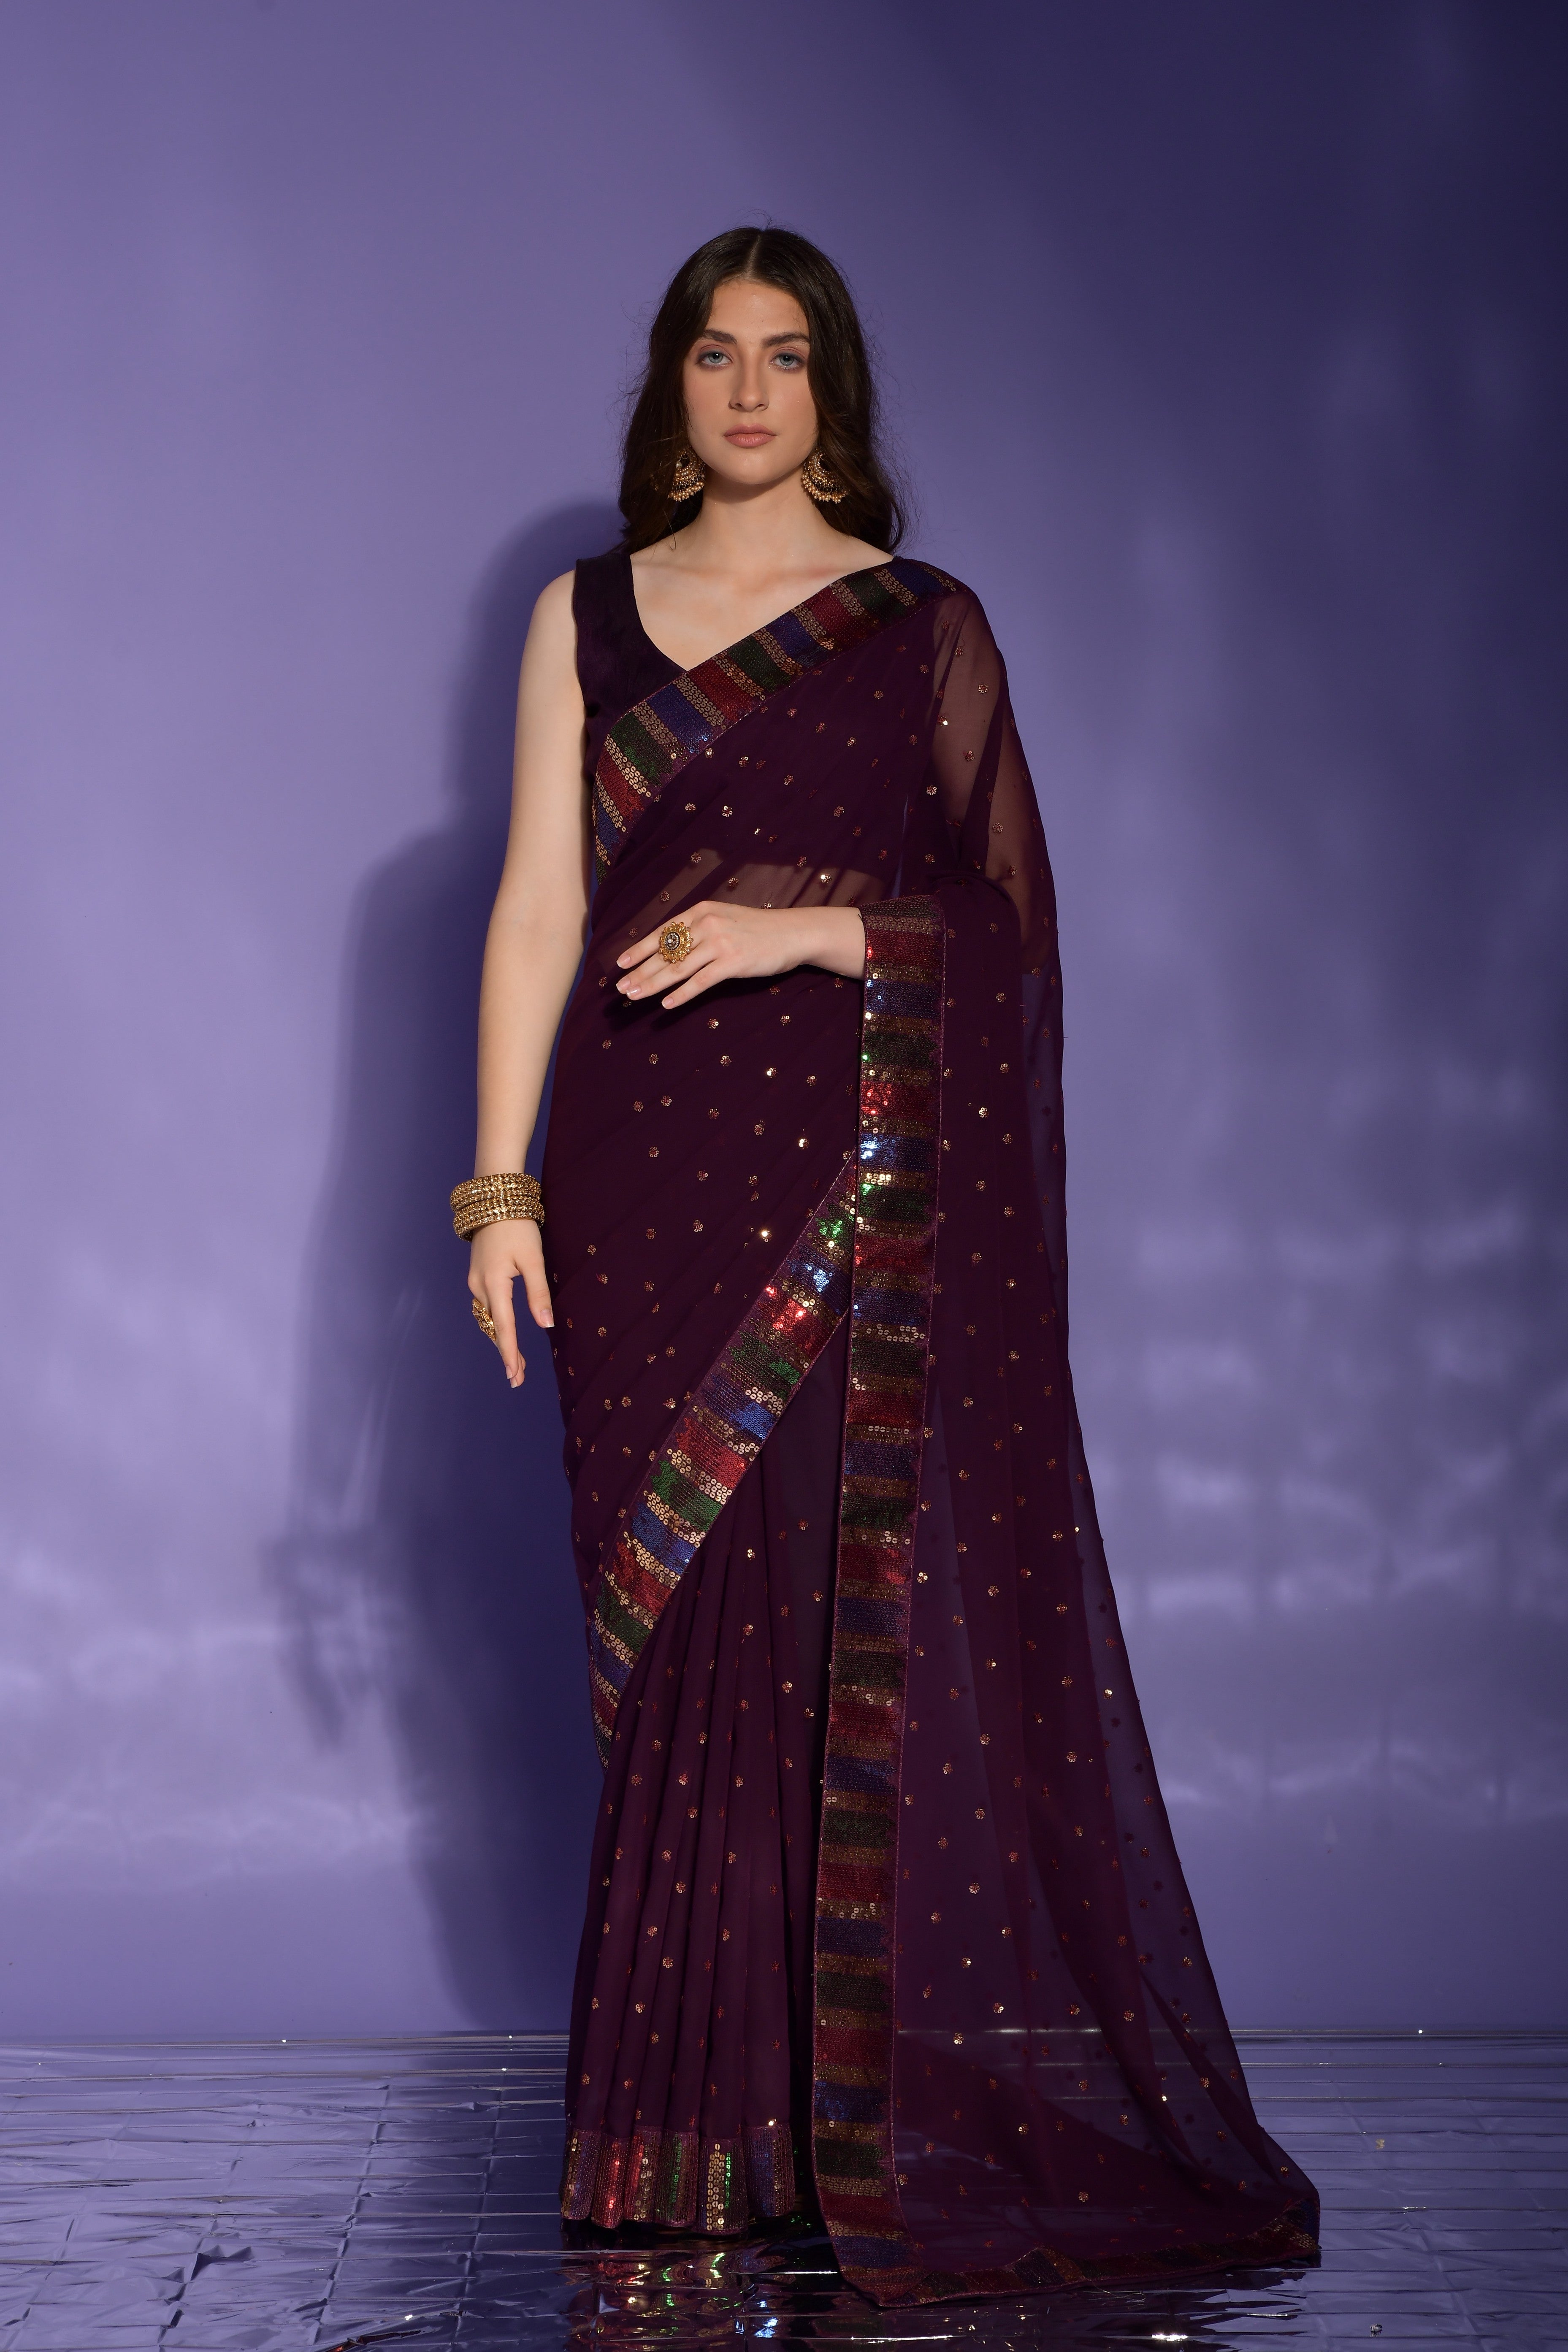 Beautiful Wine Sequence embroidery work Lace Border Saree For Women